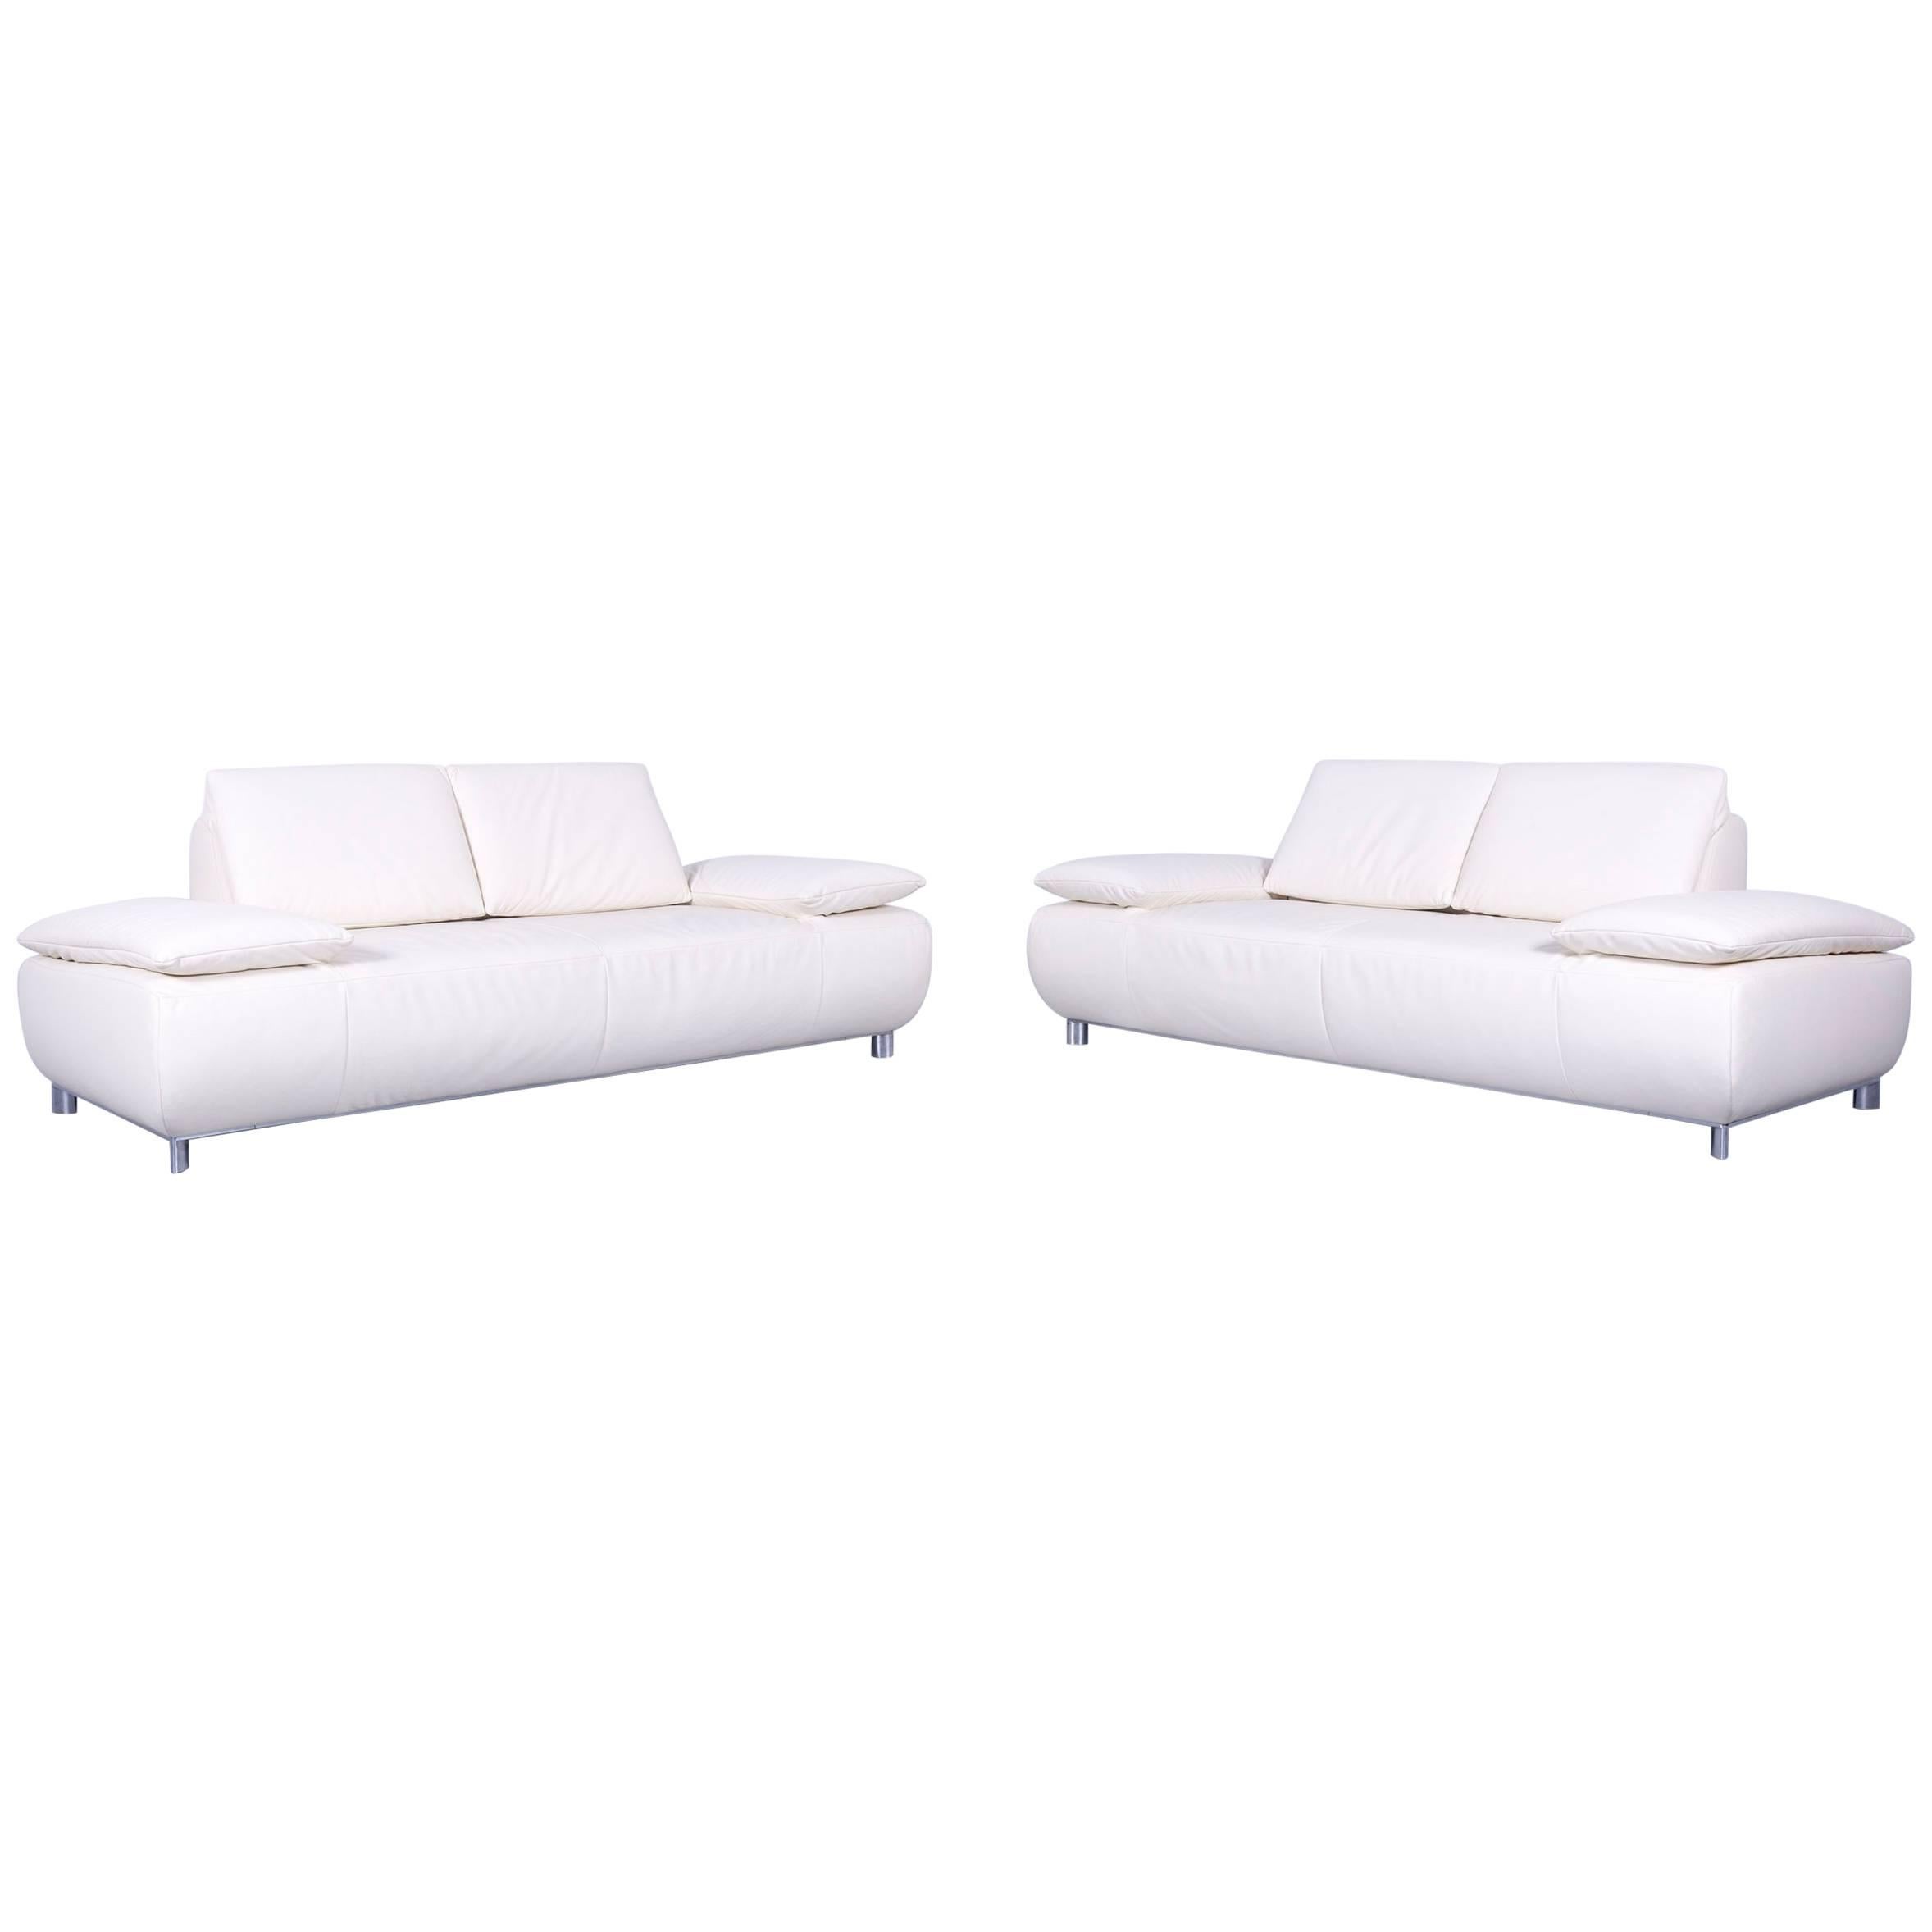 Koinor Volare Leather Sofa Set Off-White Three-Seat Couch